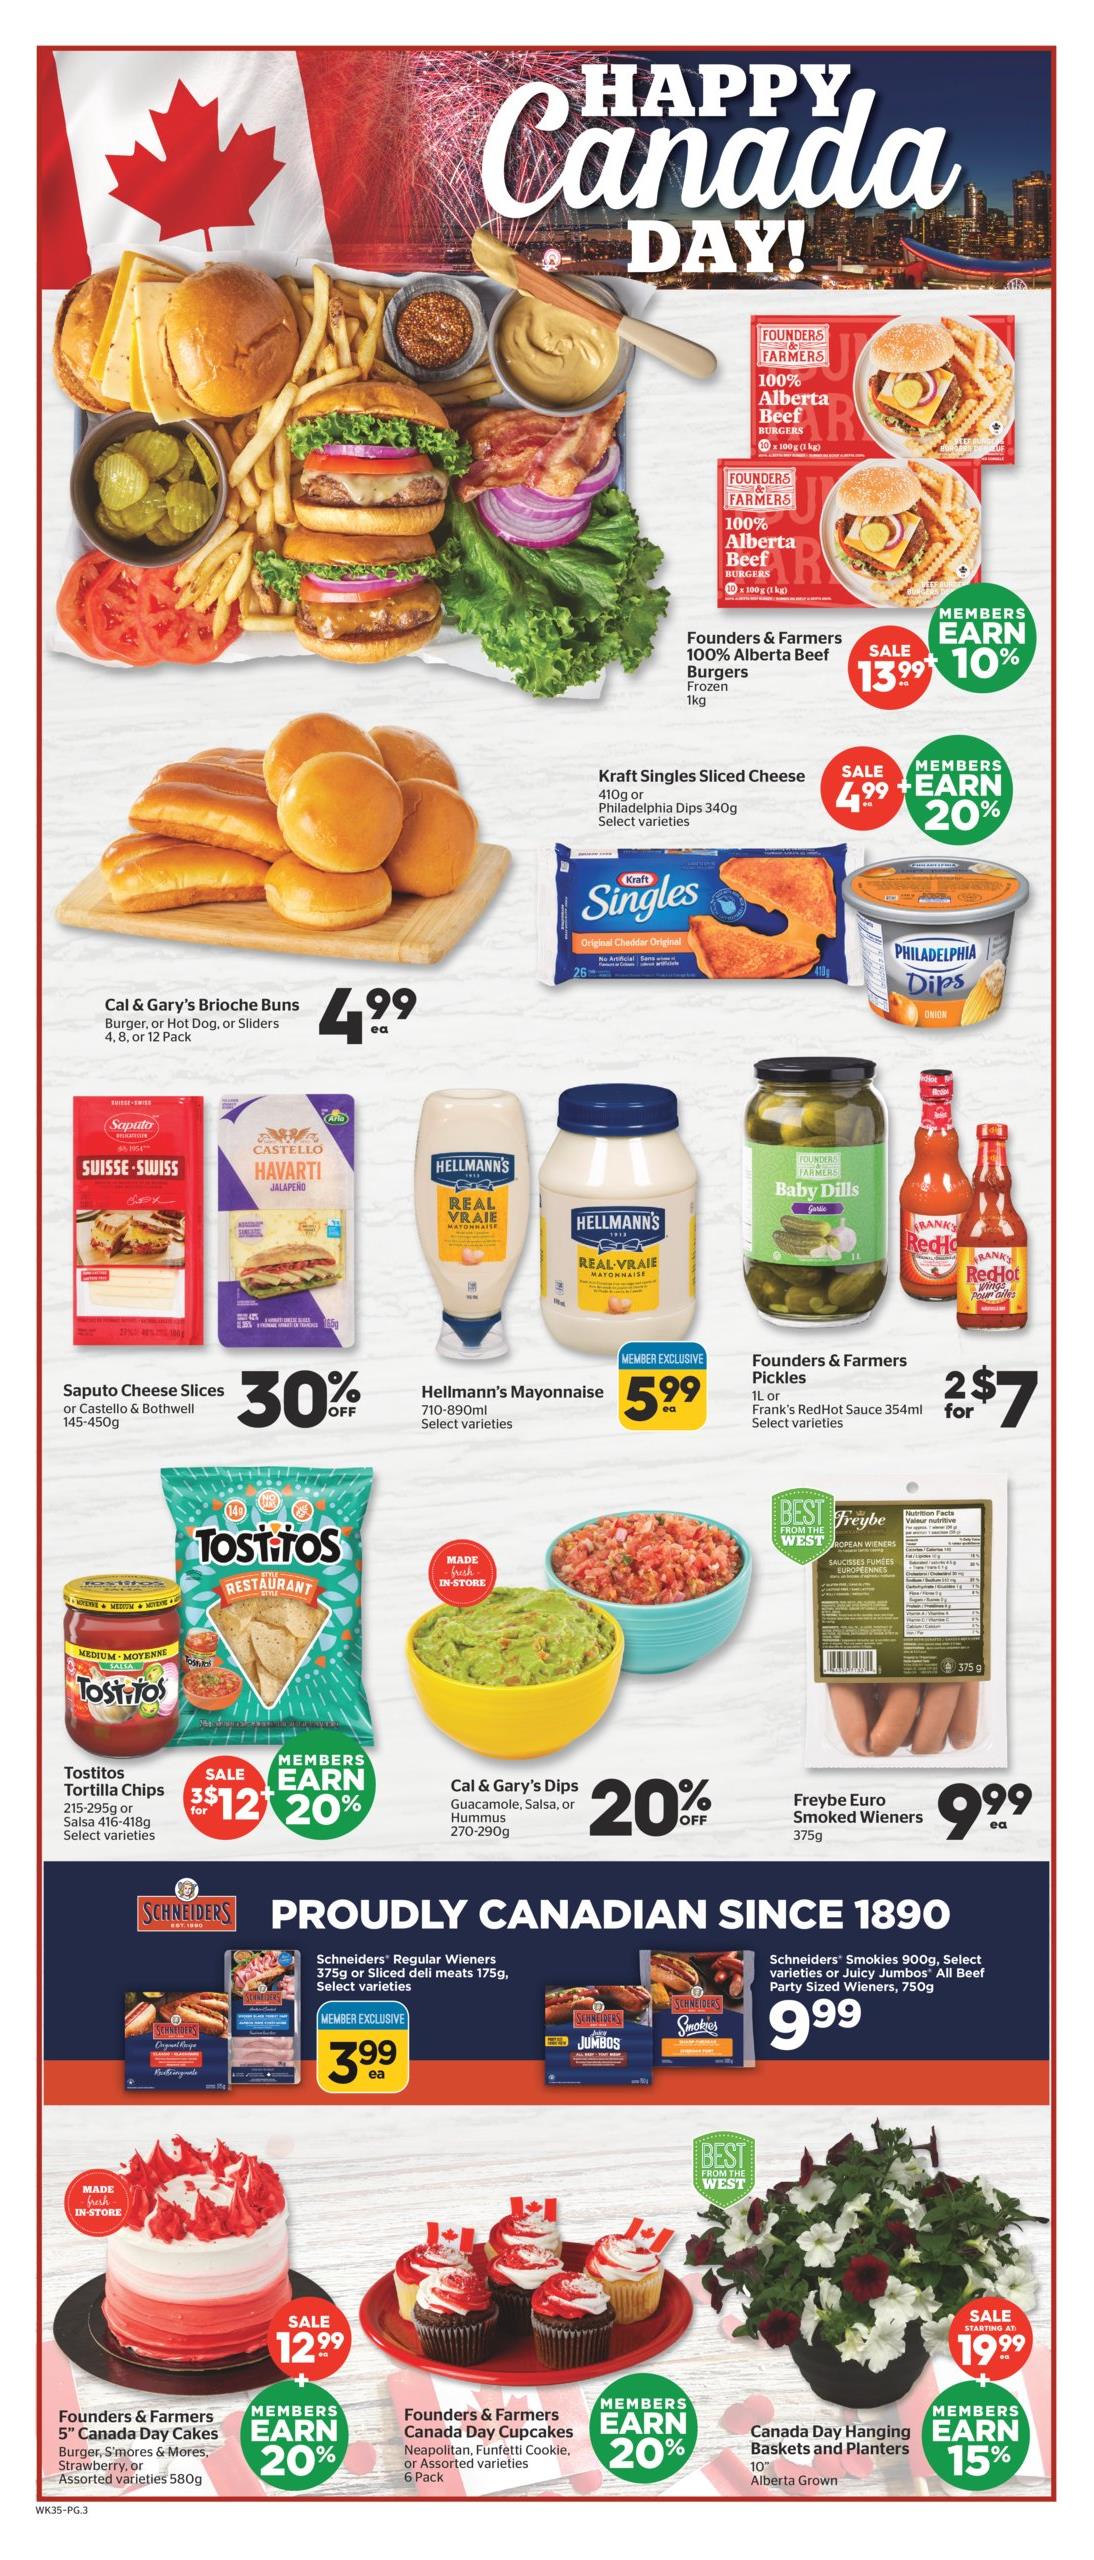 Calgary Co-op - Weekly Flyer Specials - Page 3